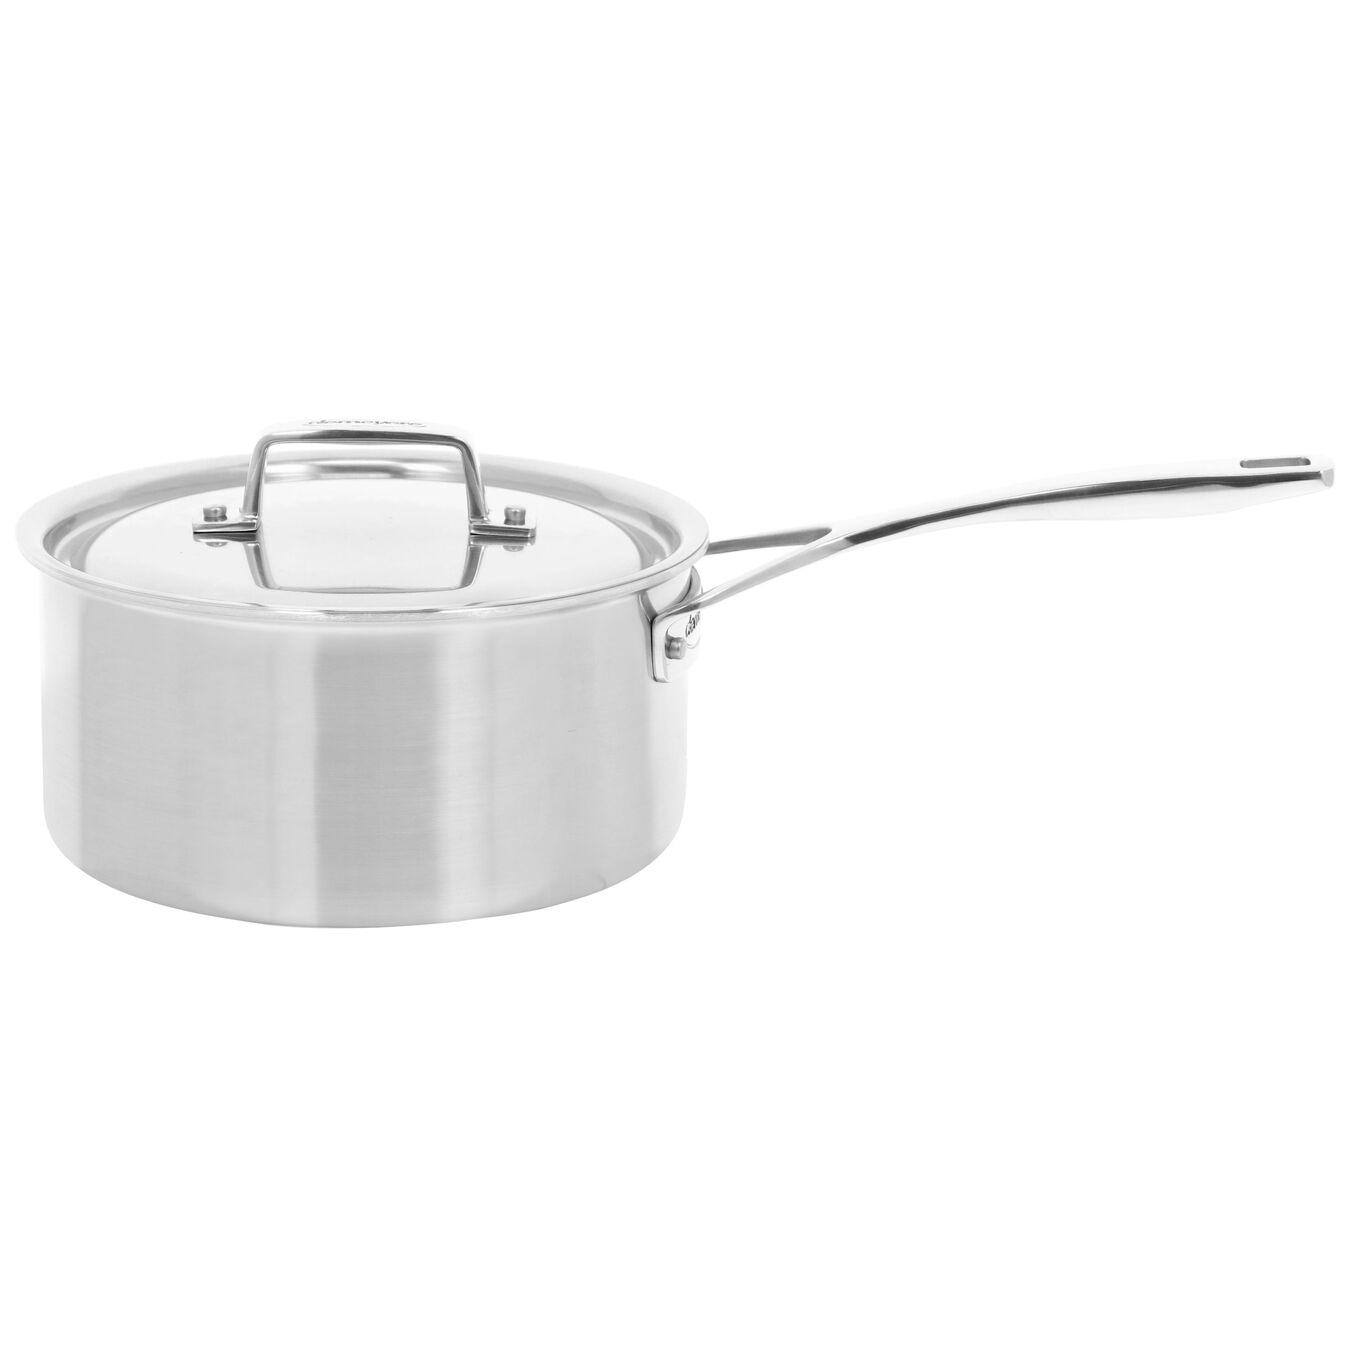 2.8 l 18/10 Stainless Steel round sauce pan with lid 3QT, silver,,large 1